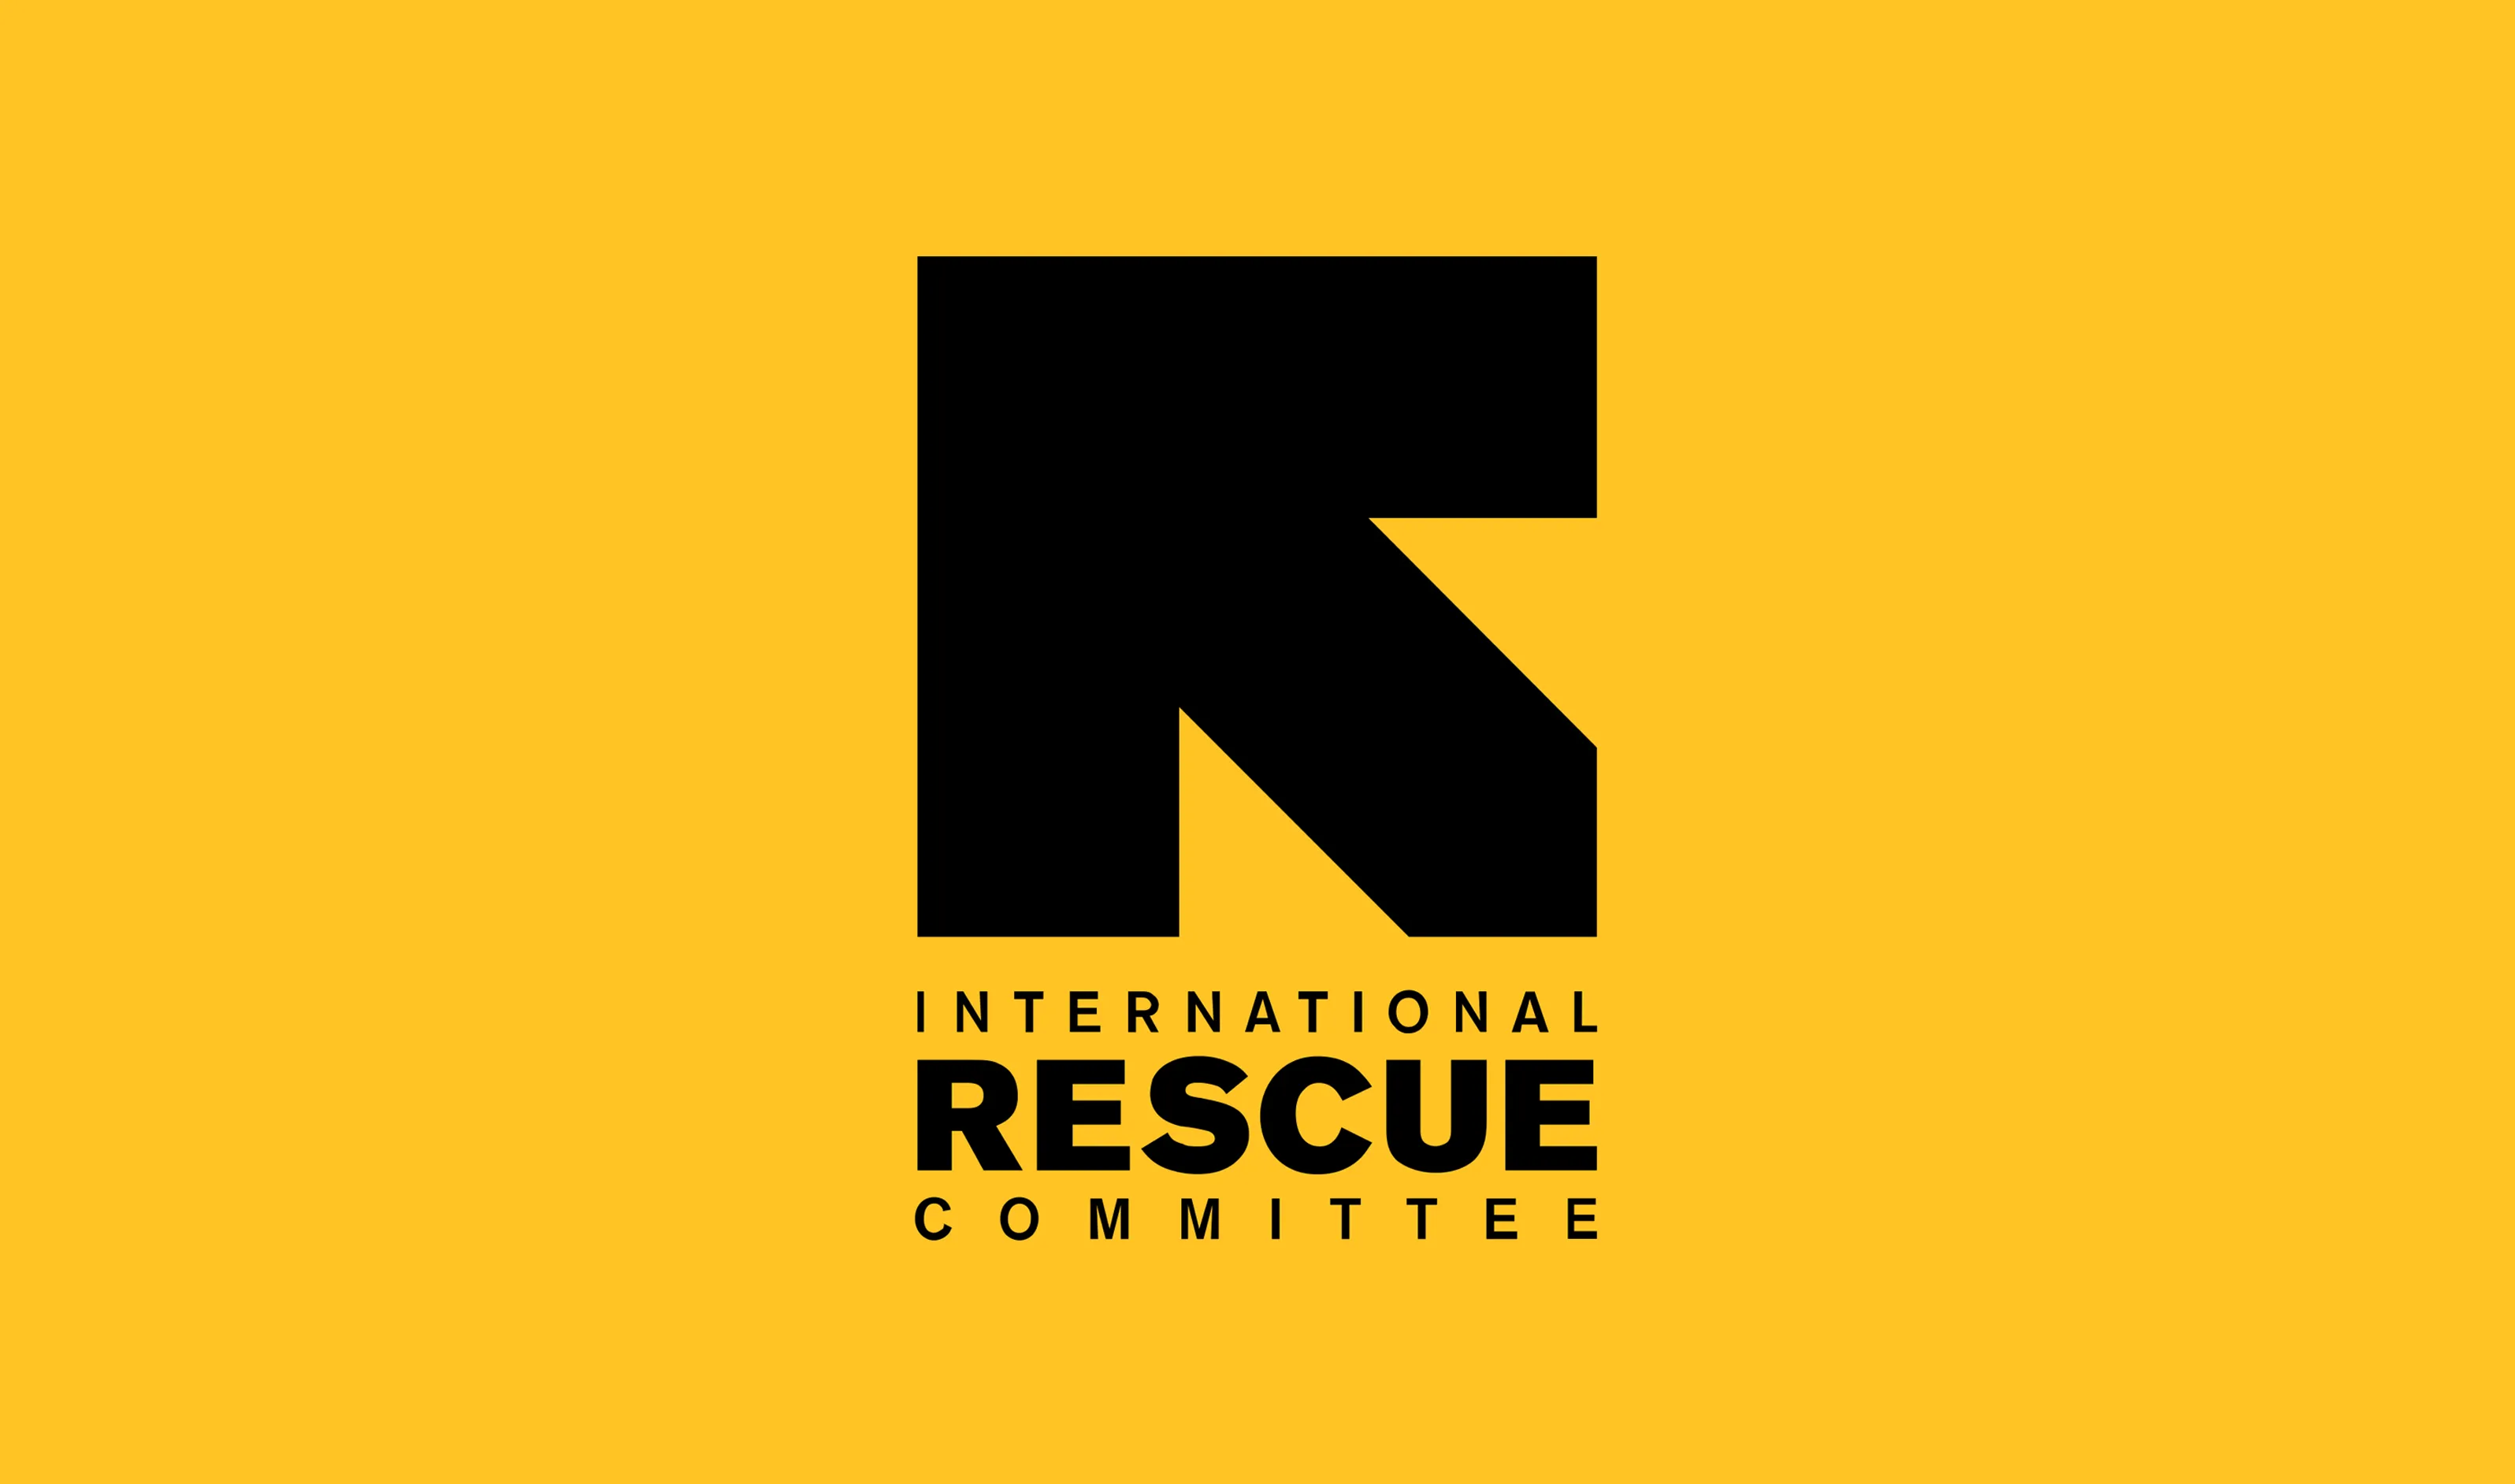 Edward Cooke Family Law sponsors the International Rescue Committee’s “Healing Classrooms Conference”